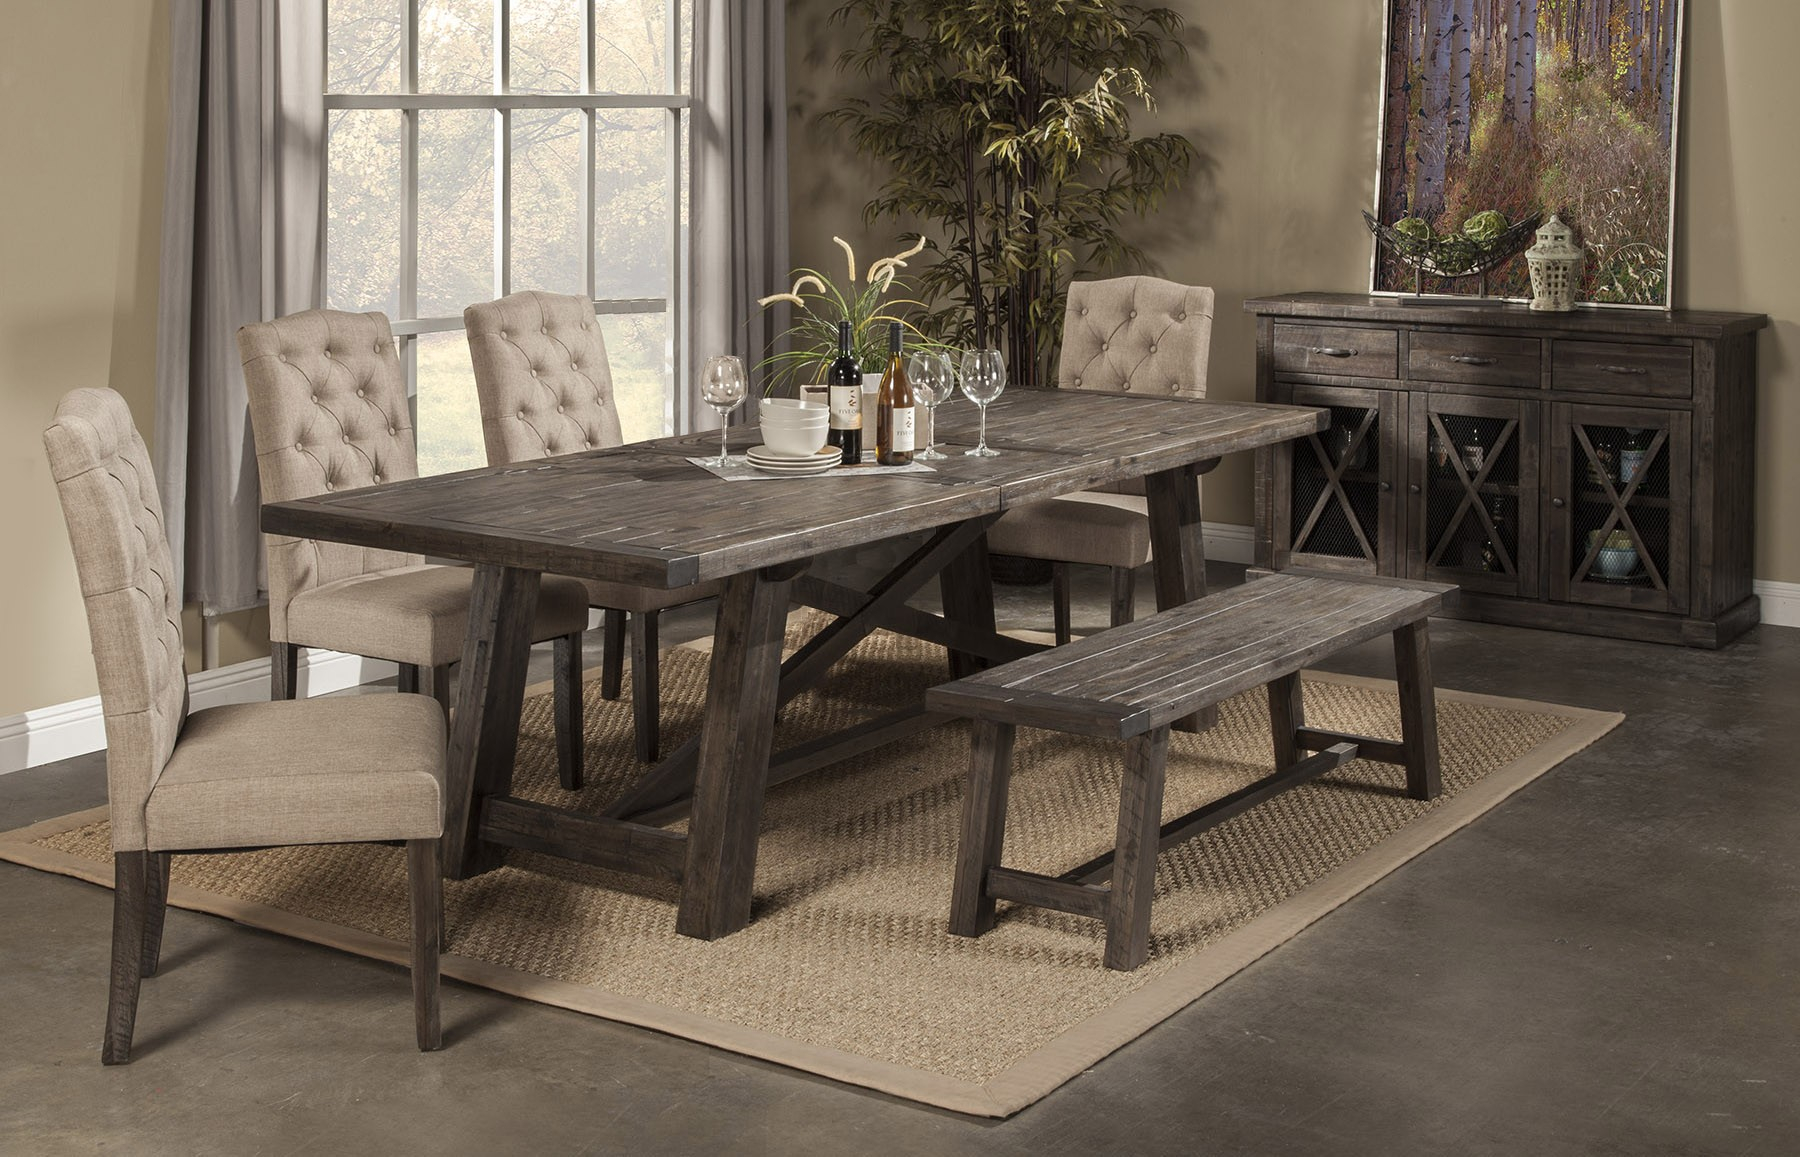 Rustic Dining Table 4 Chairs 1 Rustic Bench Pierre 6 pertaining to measurements 1800 X 1157